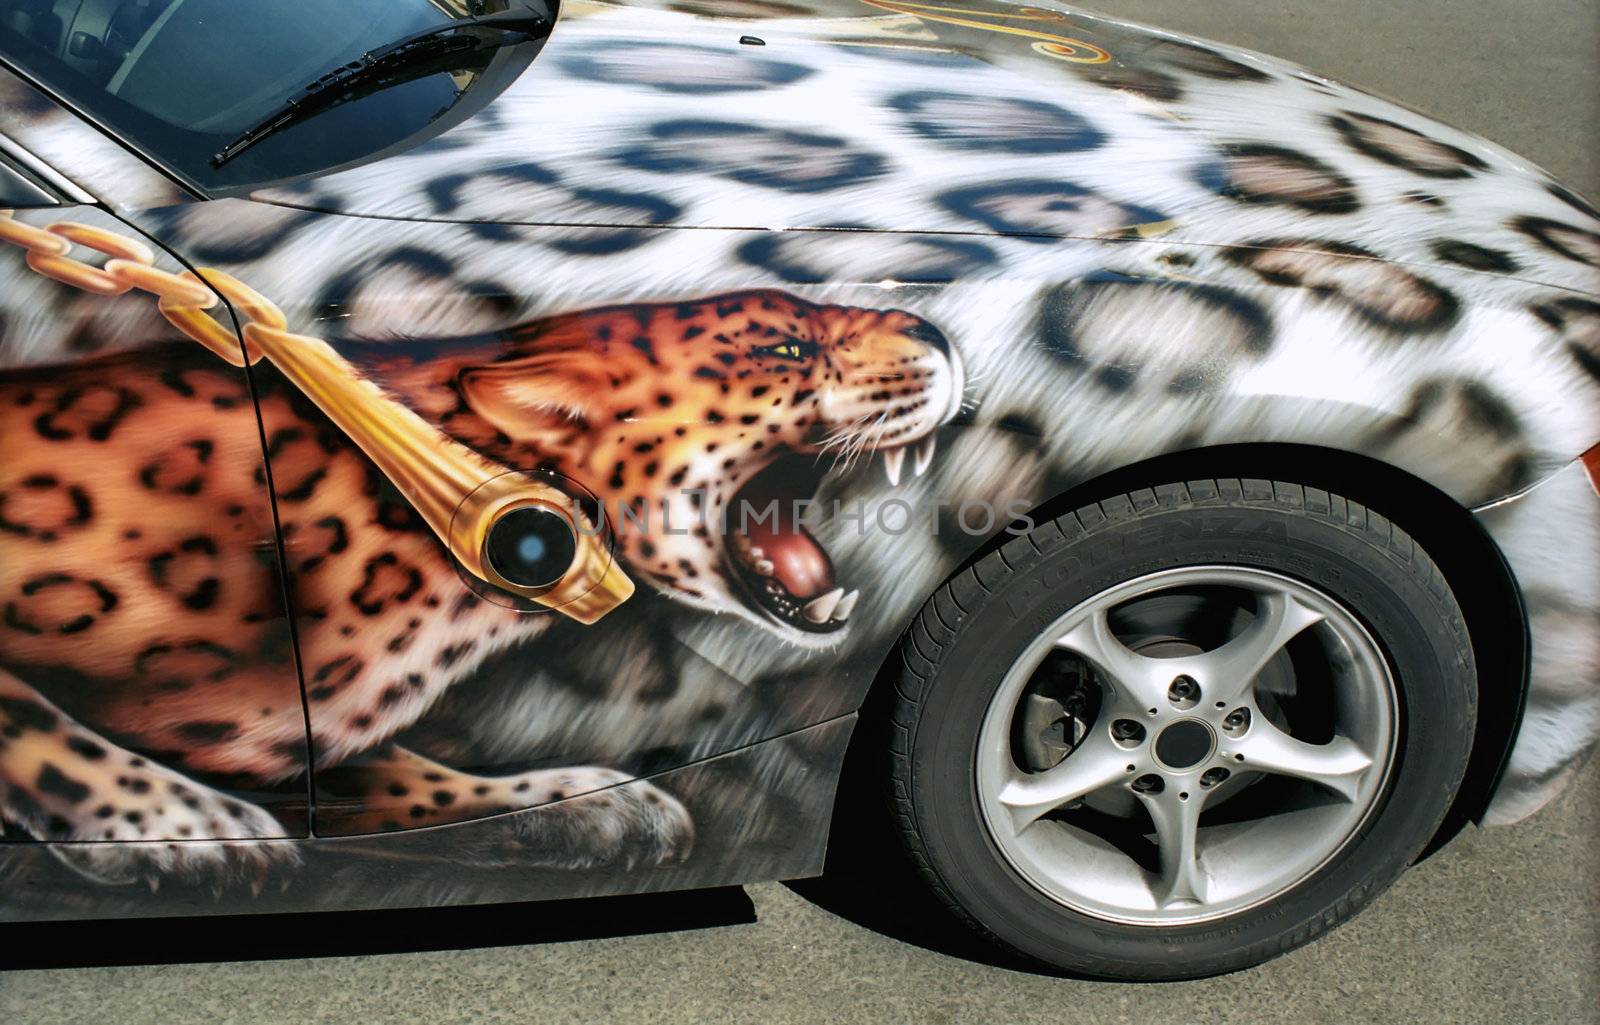 Leopard car aerography and pattern on the surface 